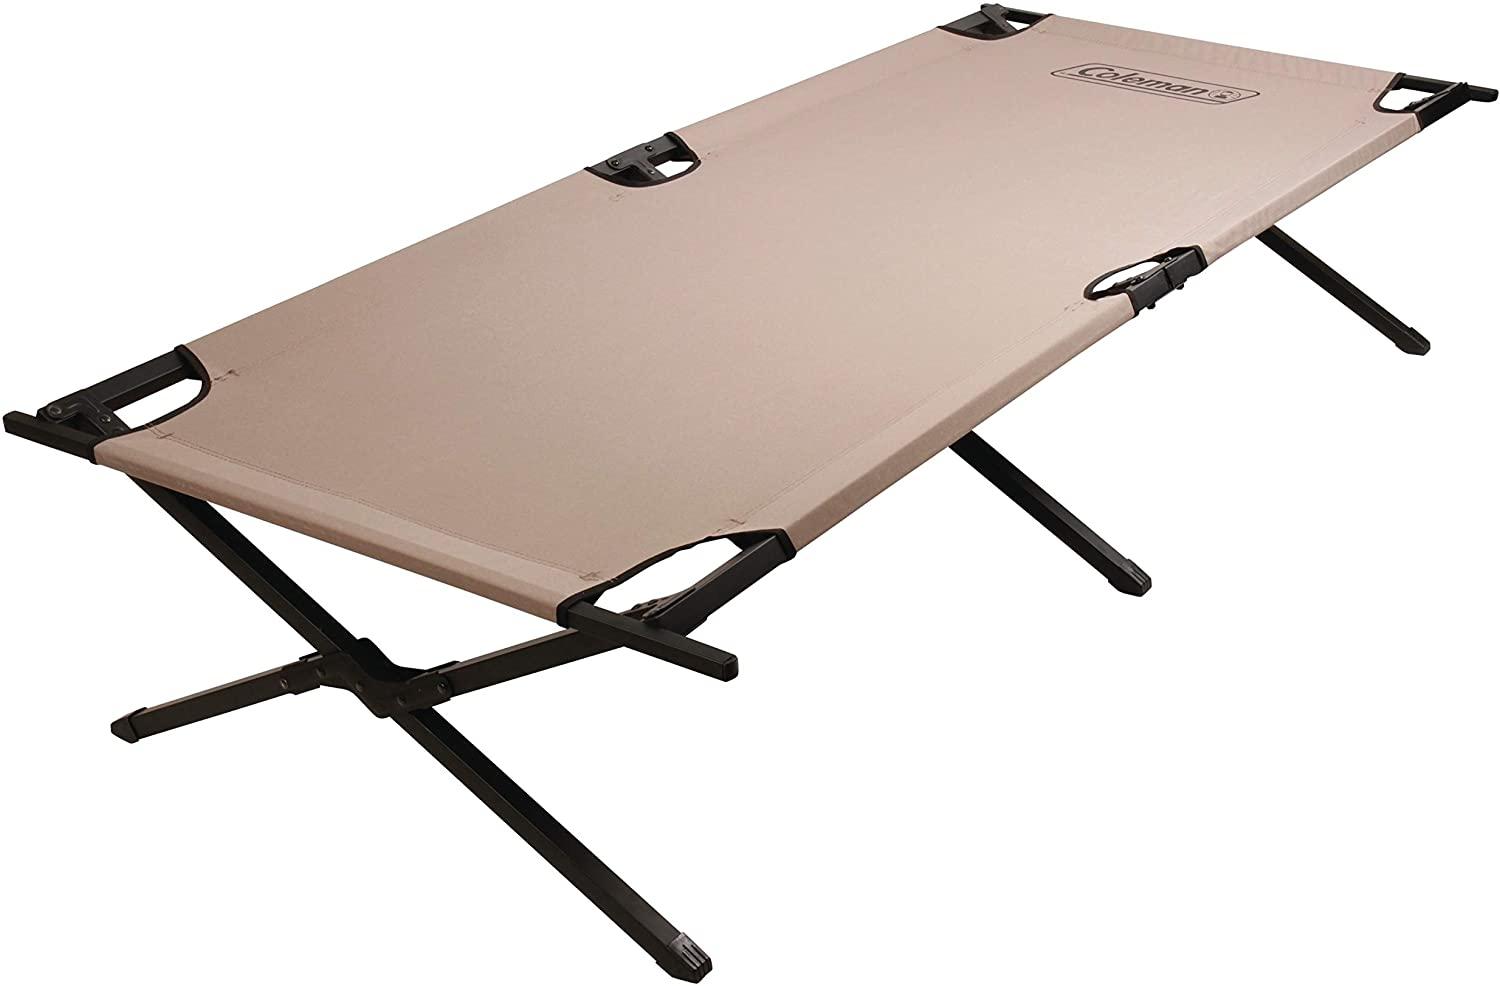 Coleman Trailhead II Folding Camping Cot for $30.79 Shipped